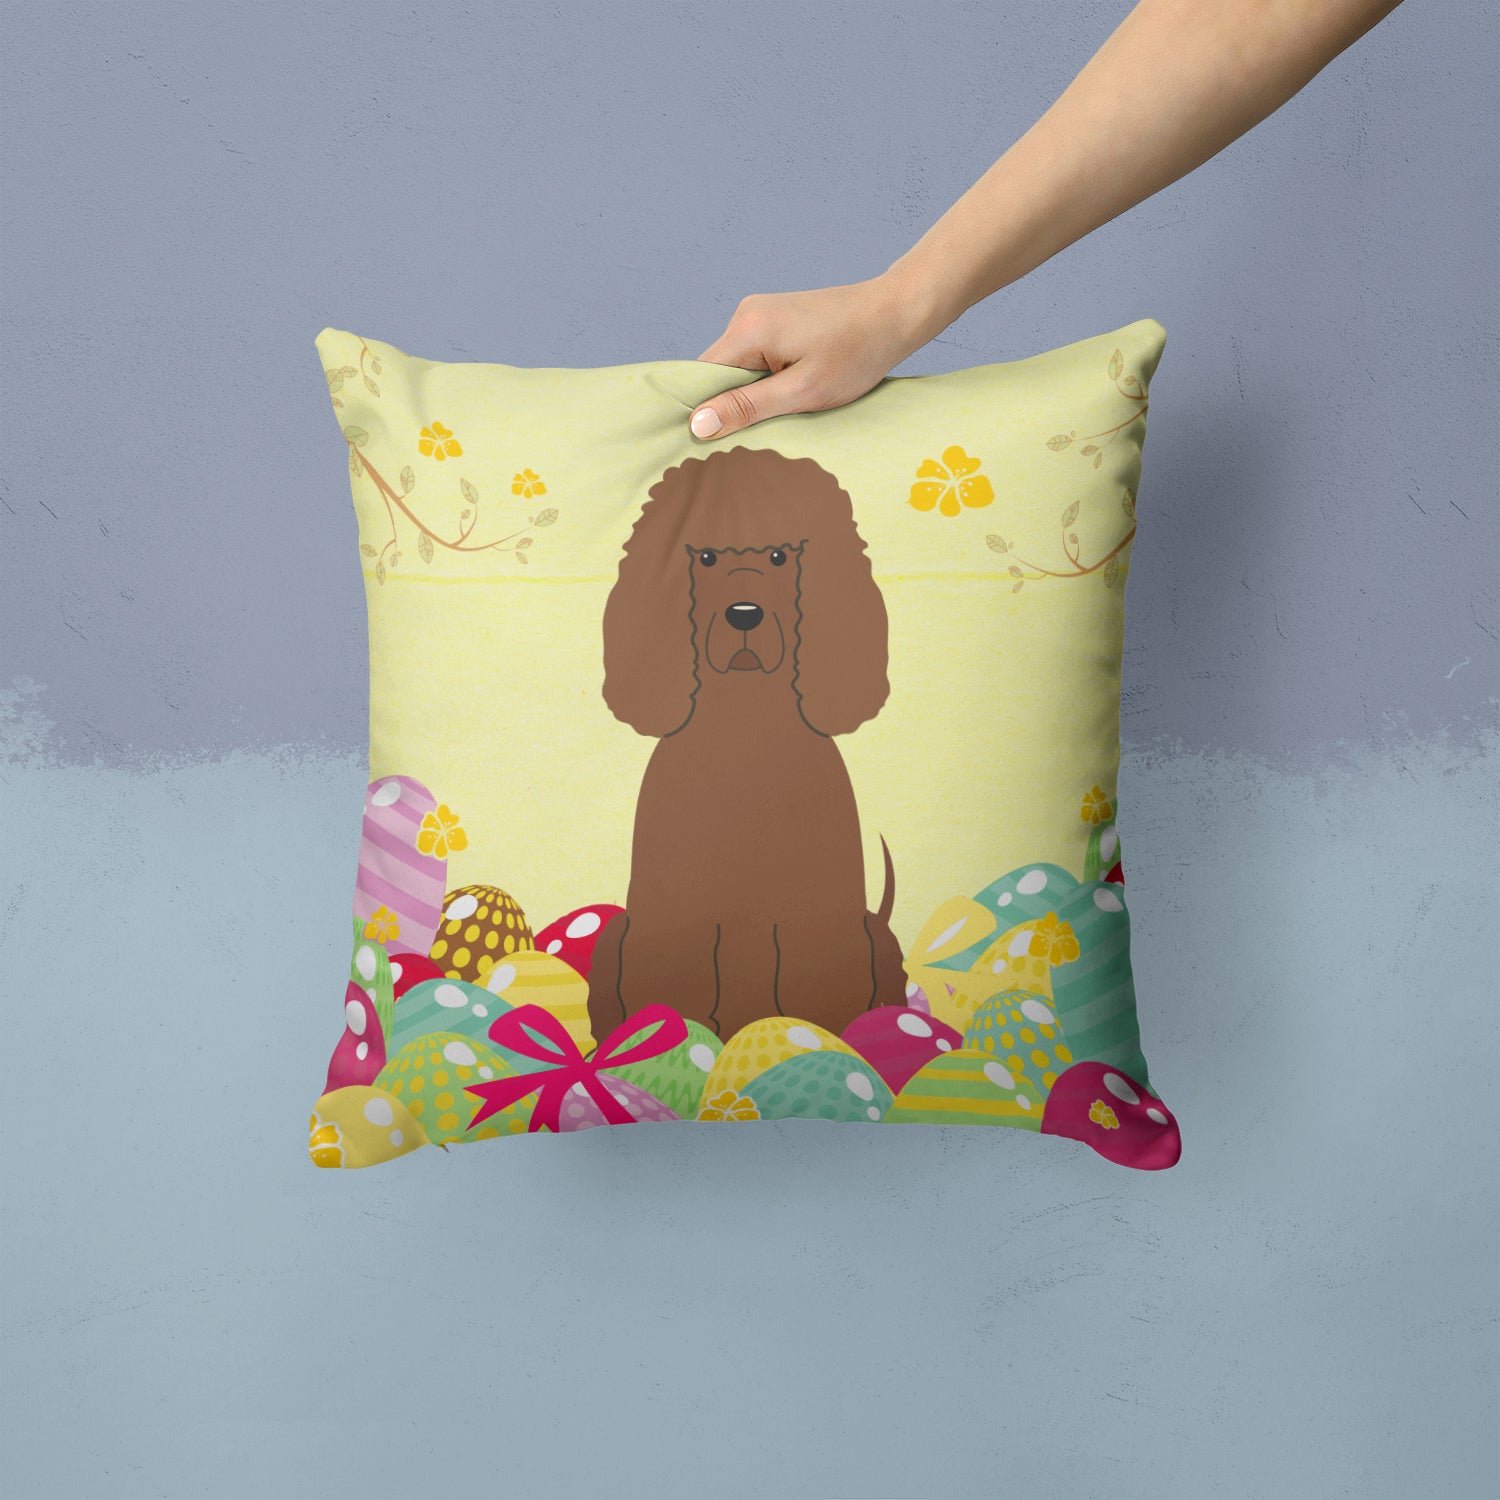 Easter Eggs Irish Water Spaniel Fabric Decorative Pillow BB6063PW1414 - the-store.com